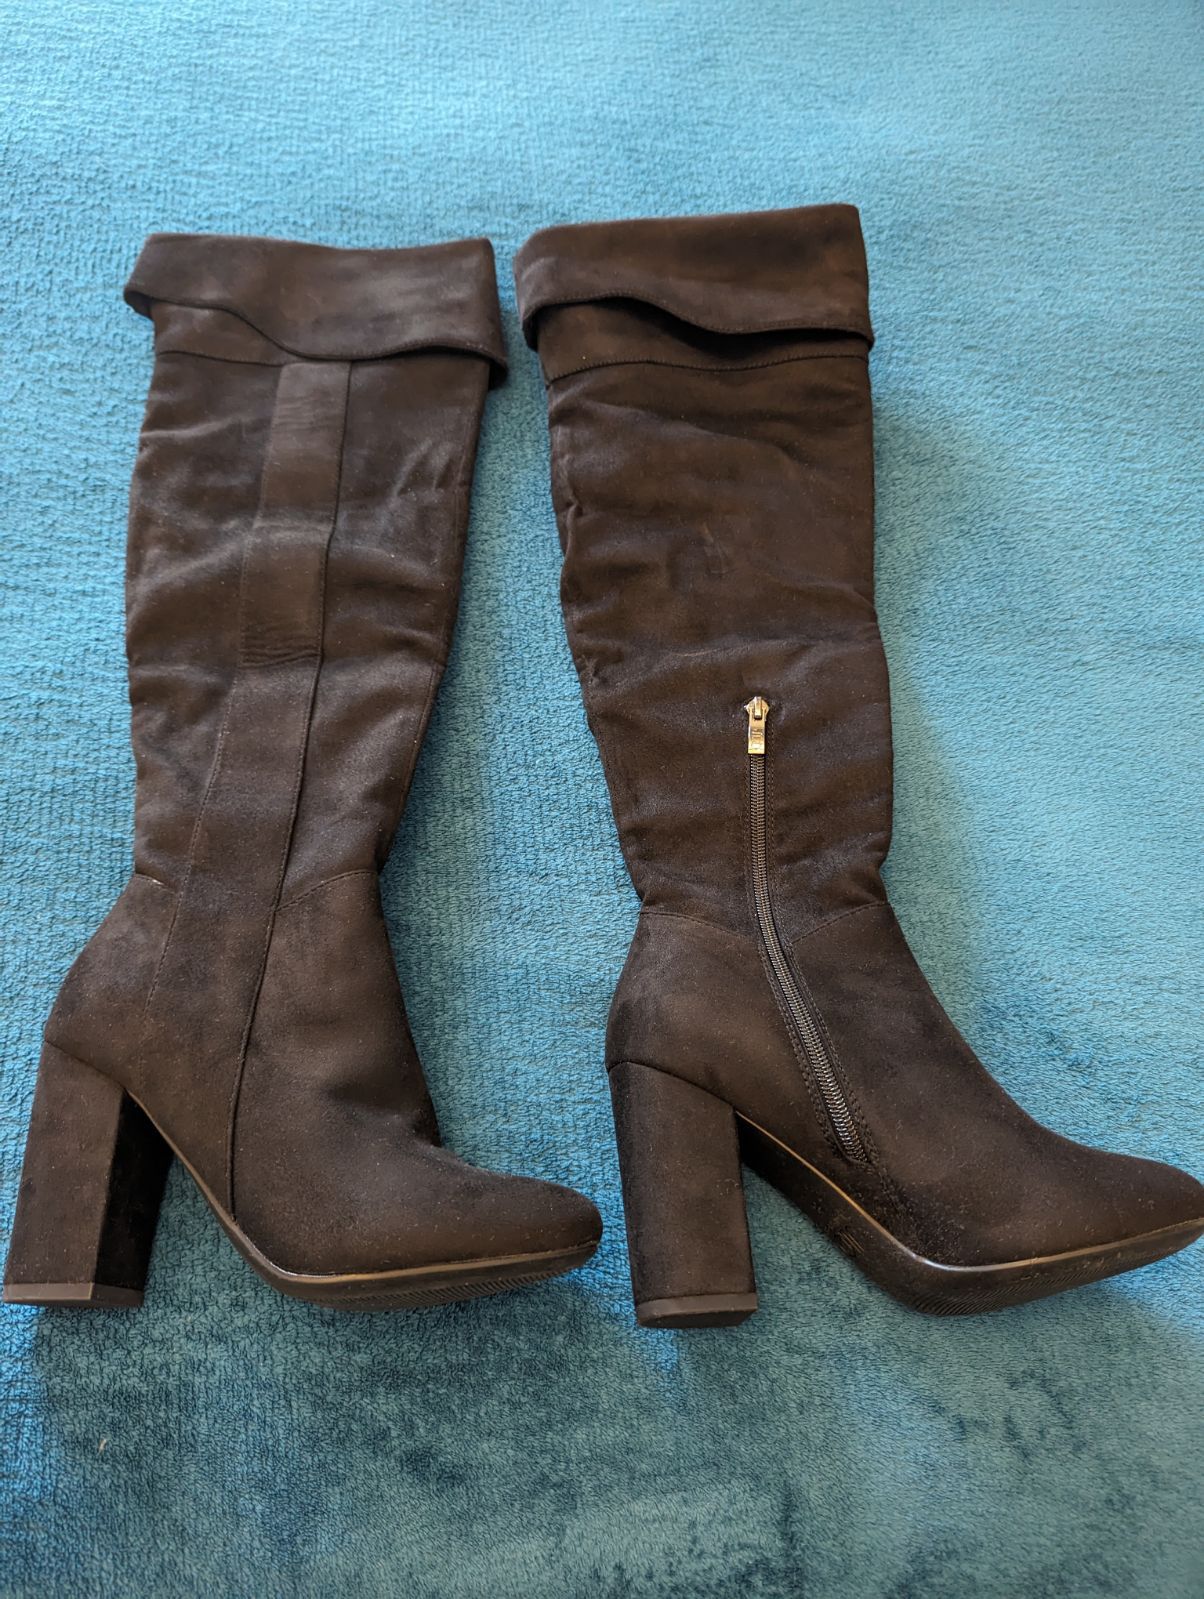 JLO Boots Size 7